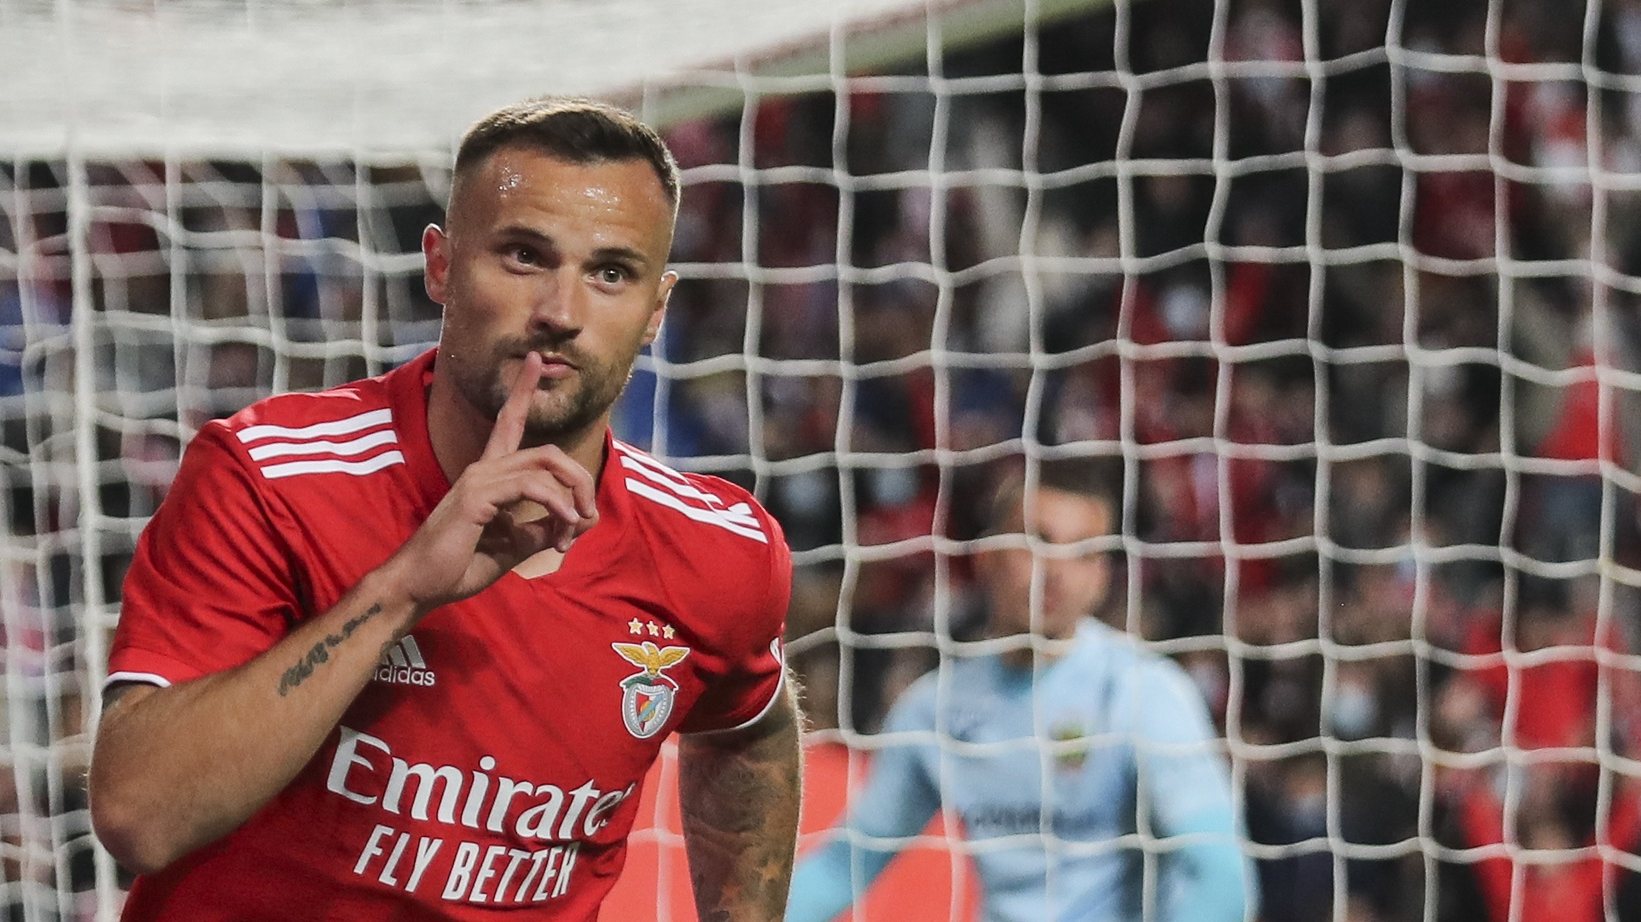 Benfica&#039;s Haris Seferovic celebrates after scoring a goal to Paços de Ferreira during the fourth round match of the Portugal Cup at Luz Stadium in Lisbon, Portugal 19 of November 2021. MIGUEL A. LOPES/LUSA